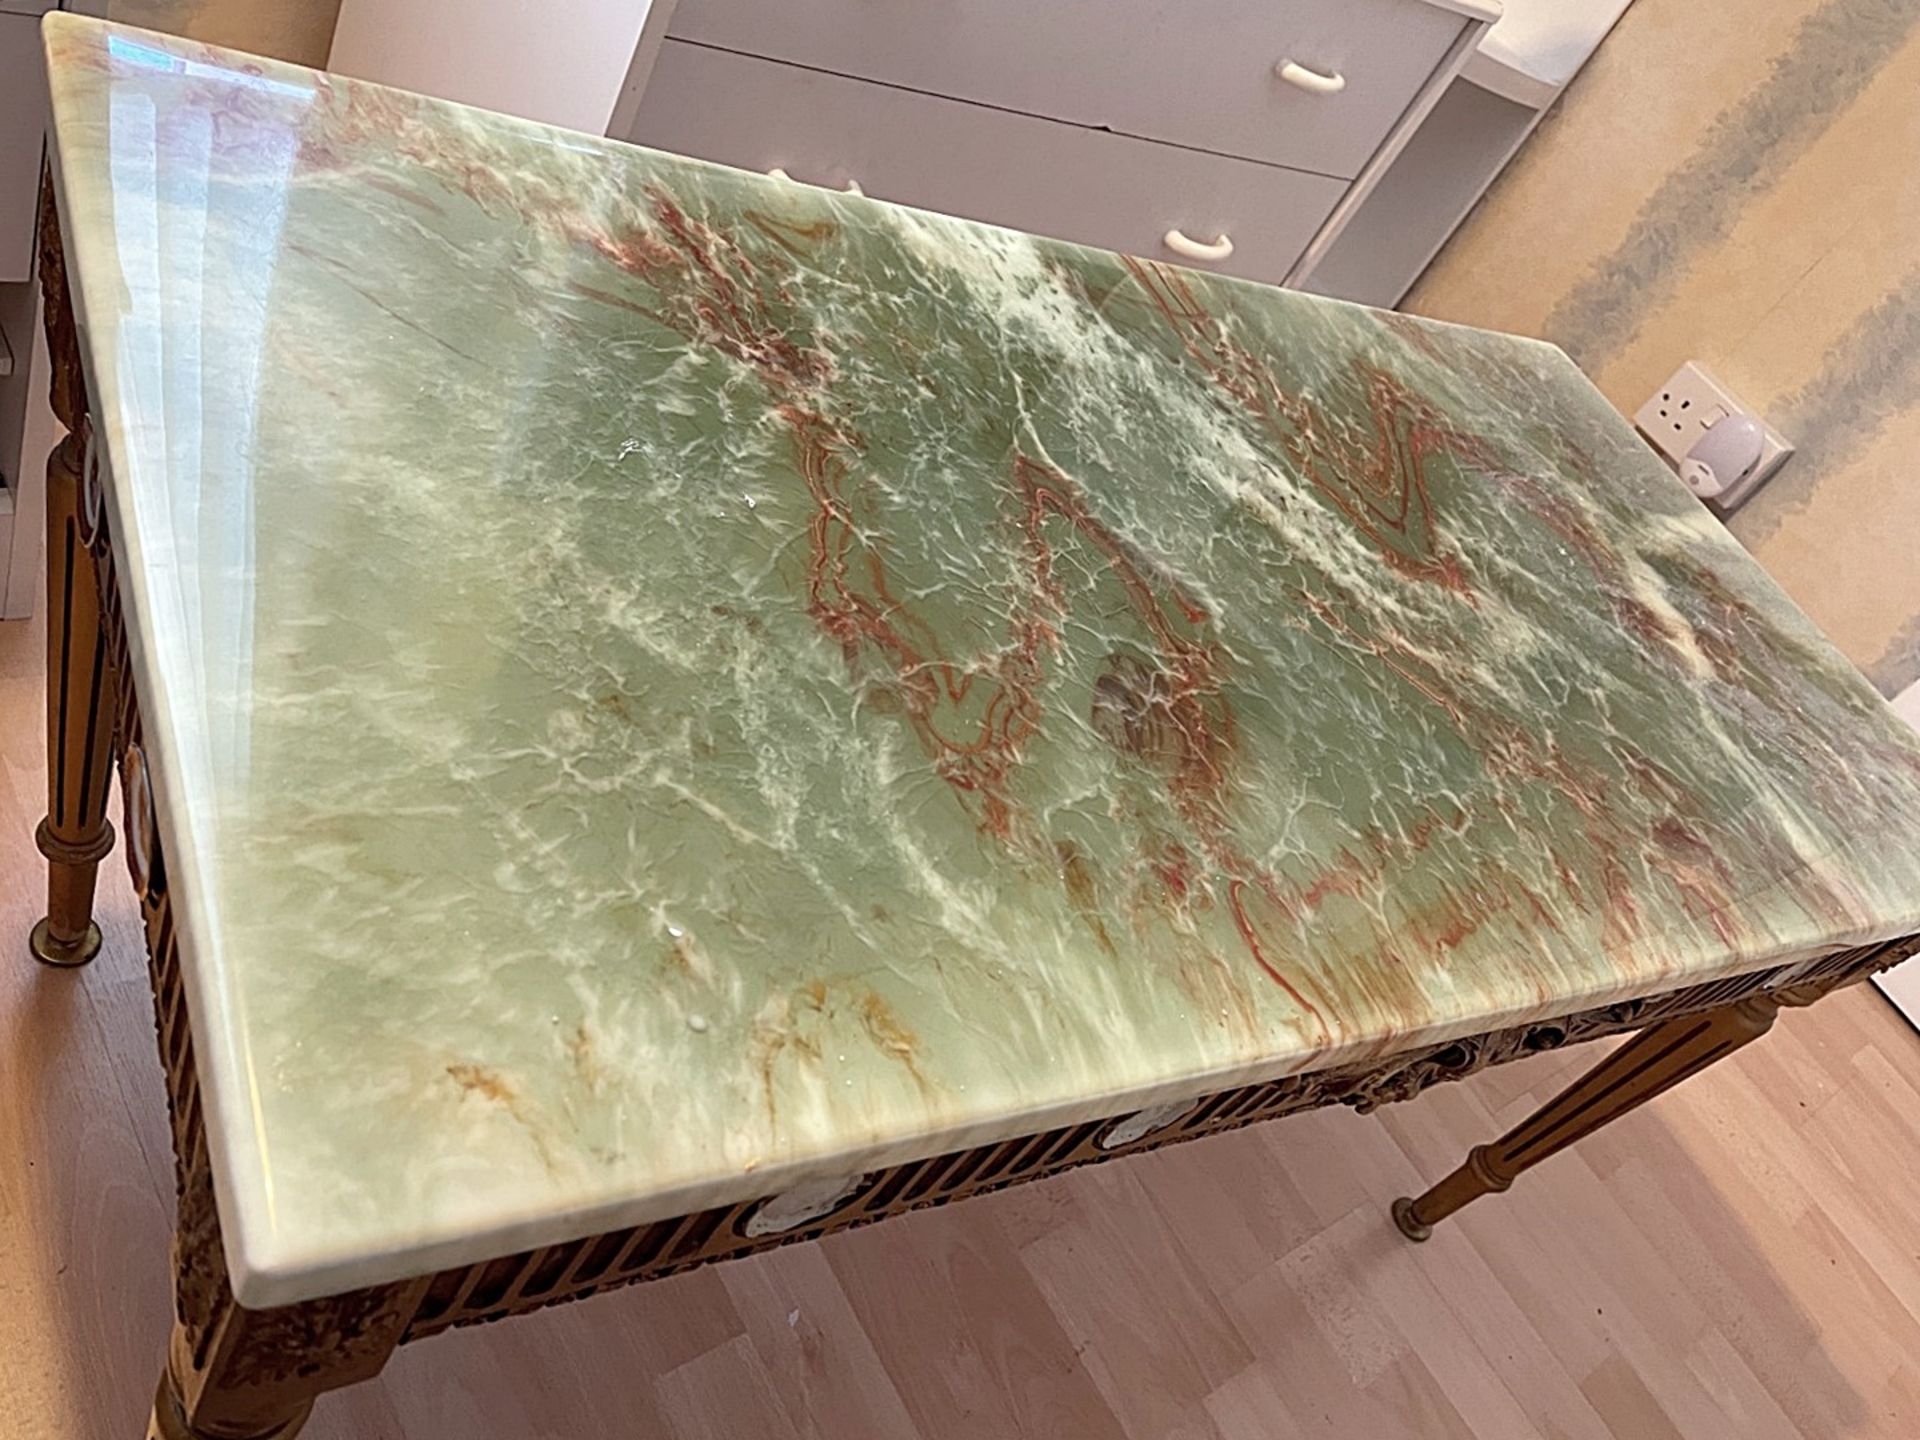 1 x Rectangular Period-style Marble Topped Table - From An Exclusive Property In Leeds - No VAT on - Image 4 of 5